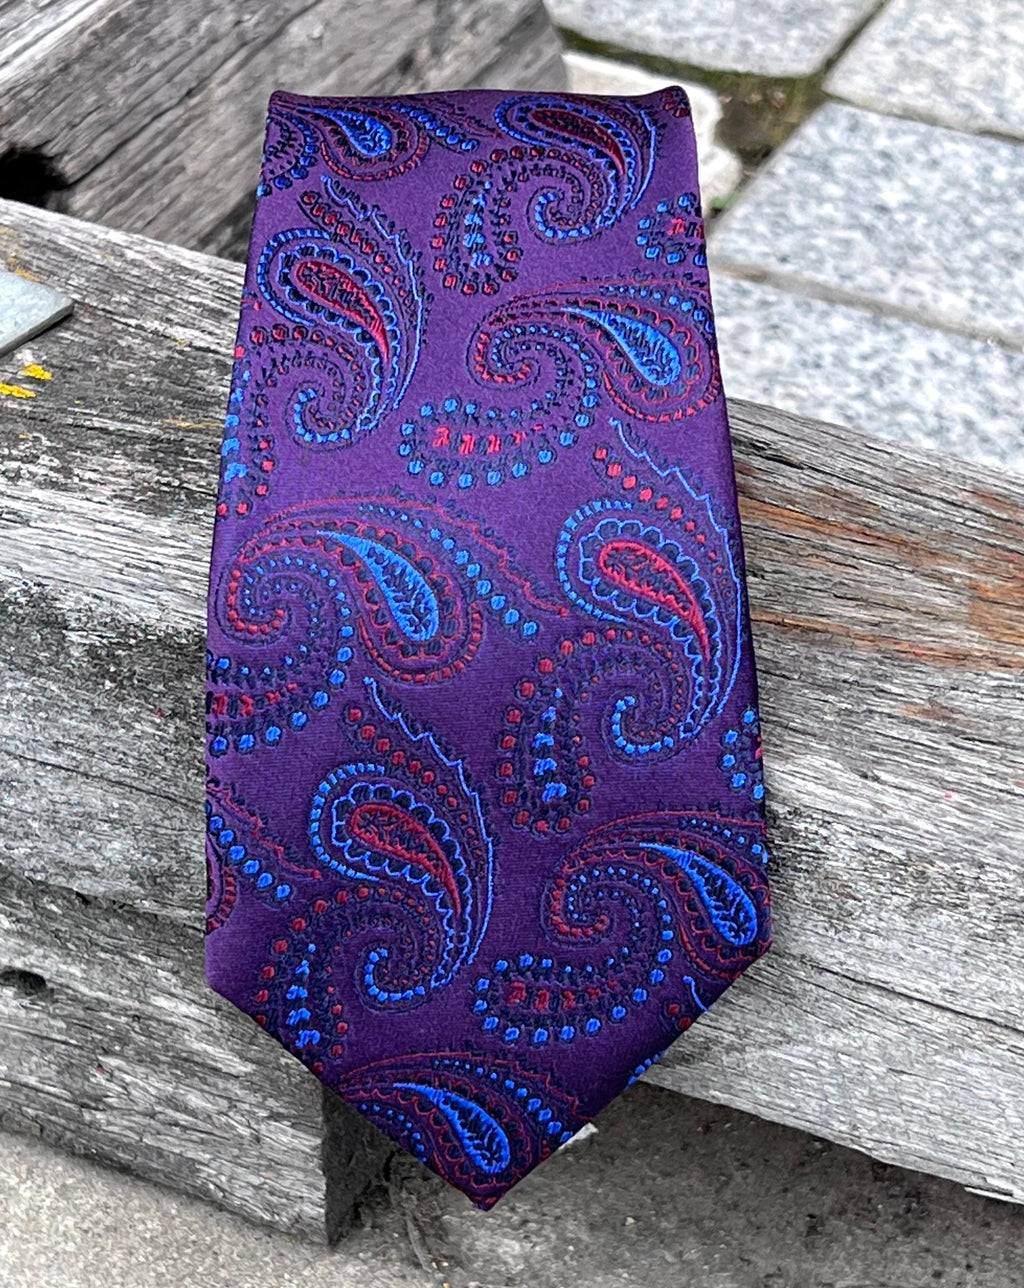 Pure silk paisley tie - blue, red and purple